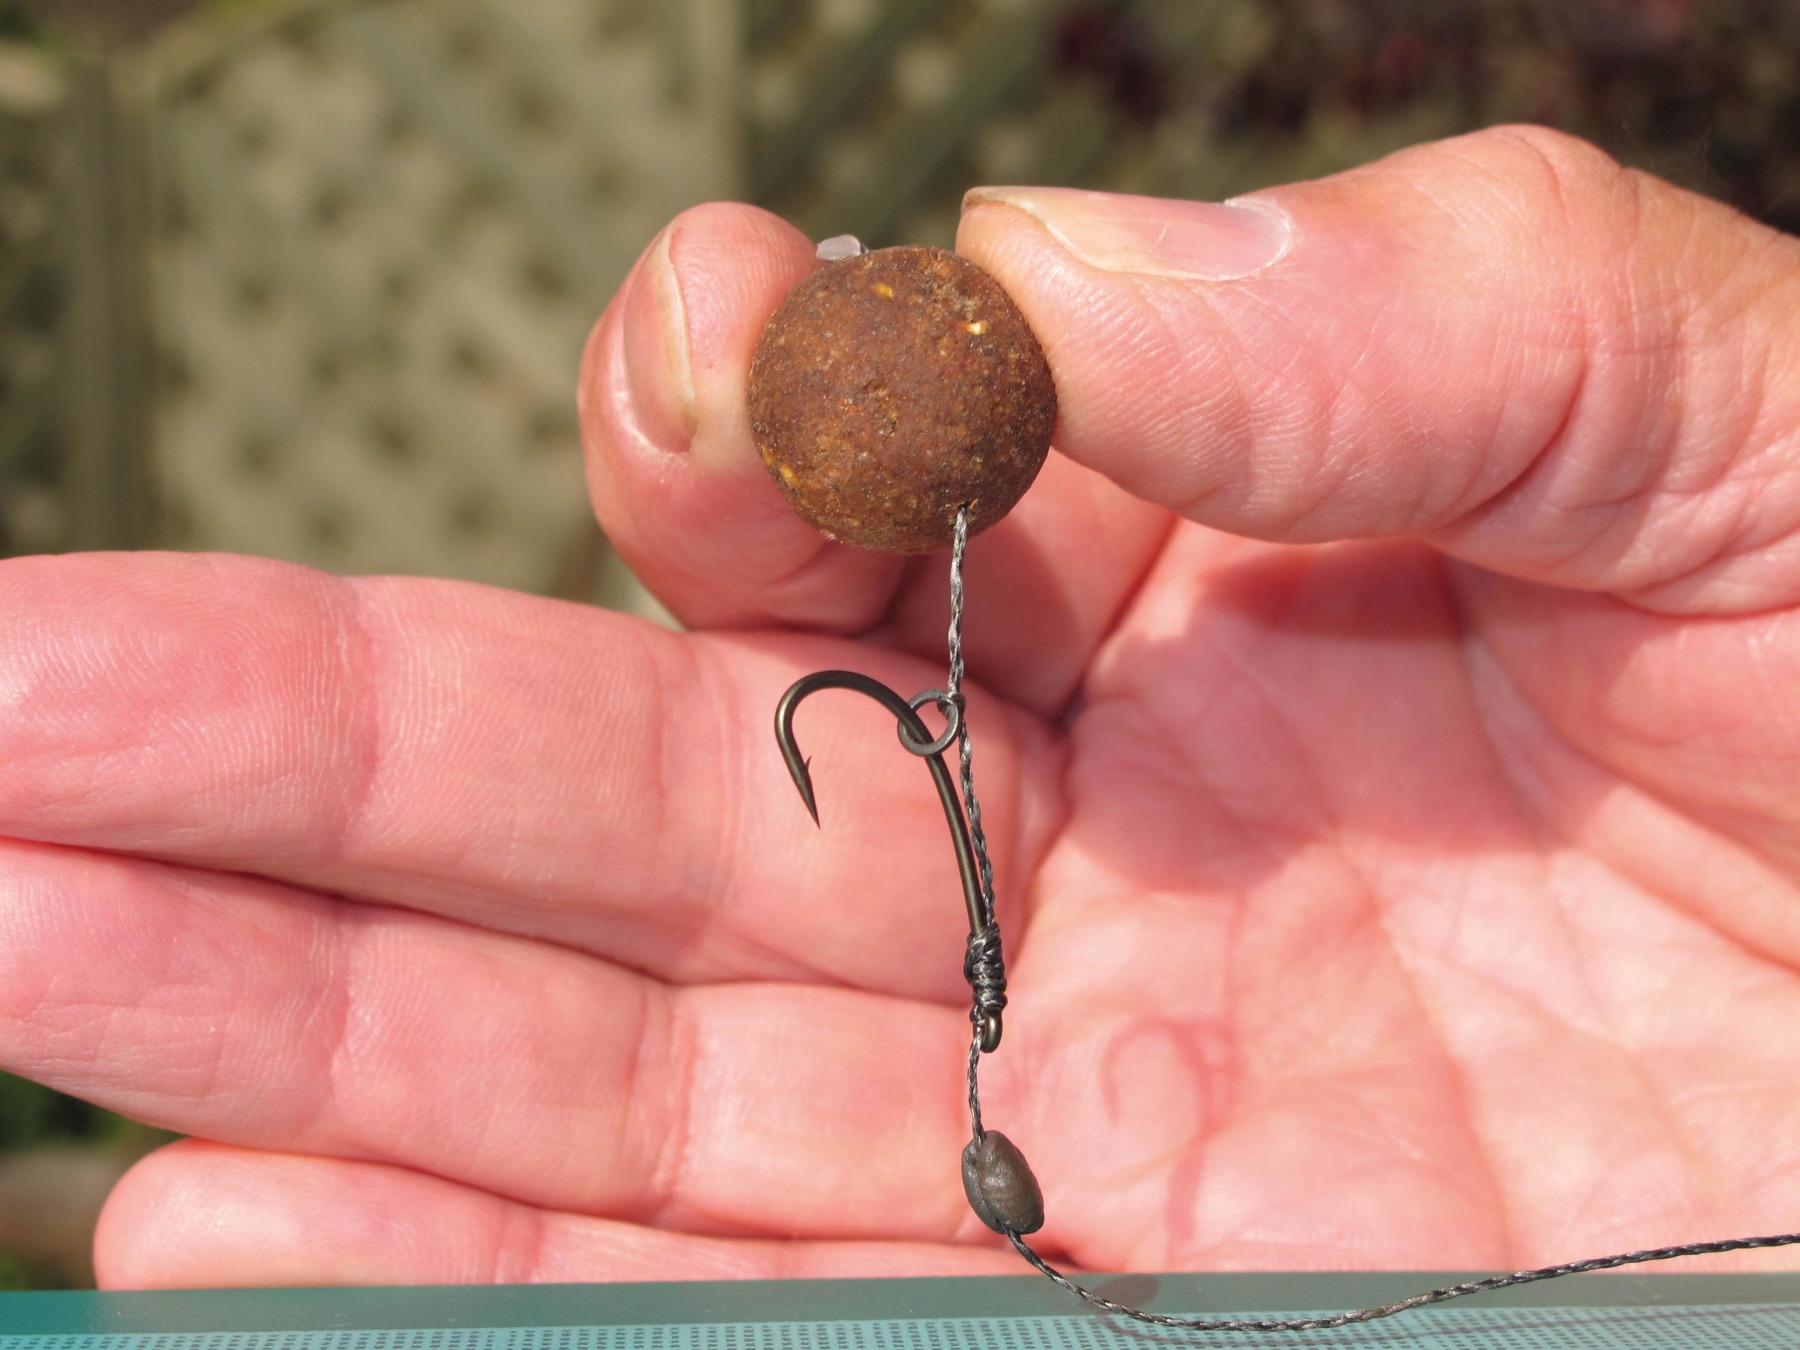 As you can see, by adding the counter-balance tungsten putty just below the eye of the hook, the hook will automatically cock and enter the carp’s mouth bend first, every time